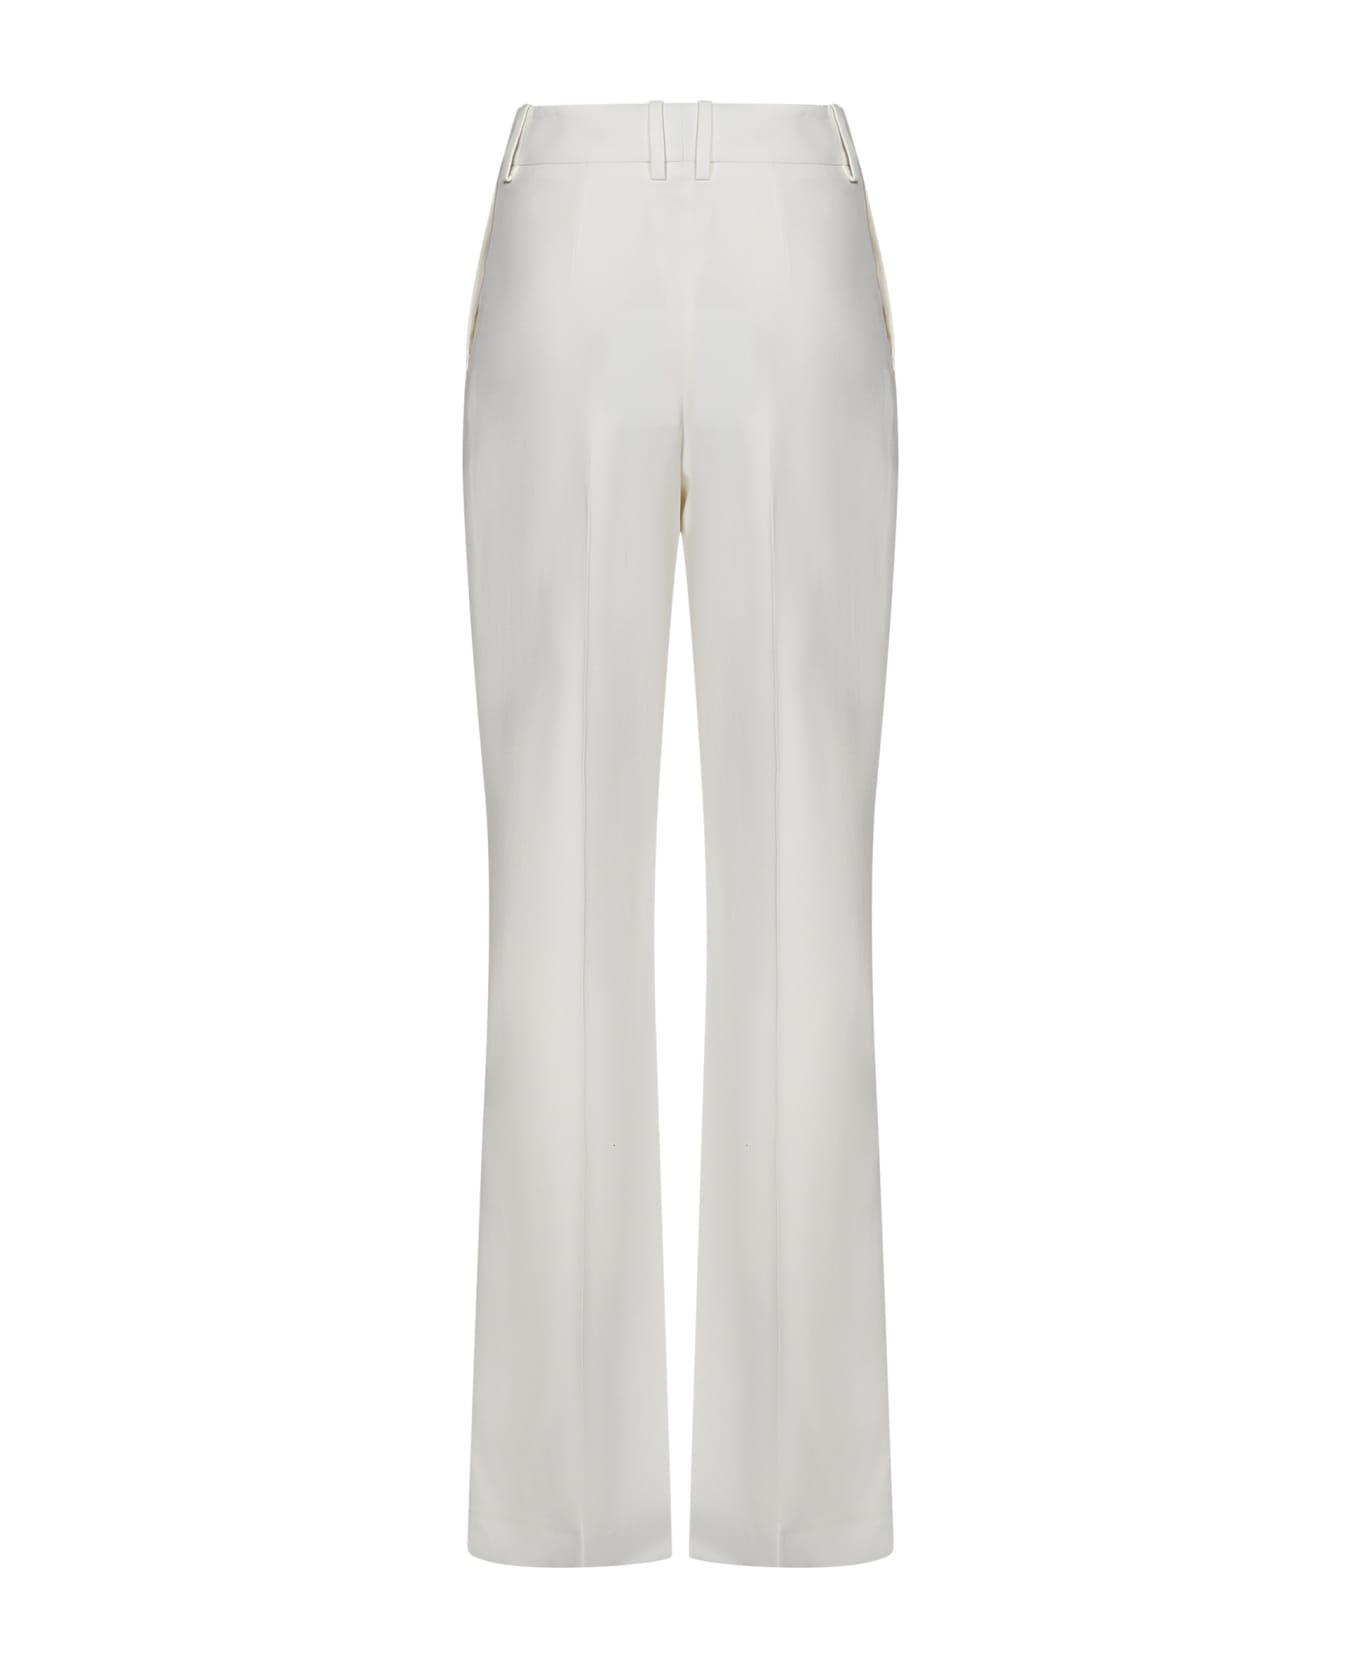 White Viscose Blend Trousers - 2